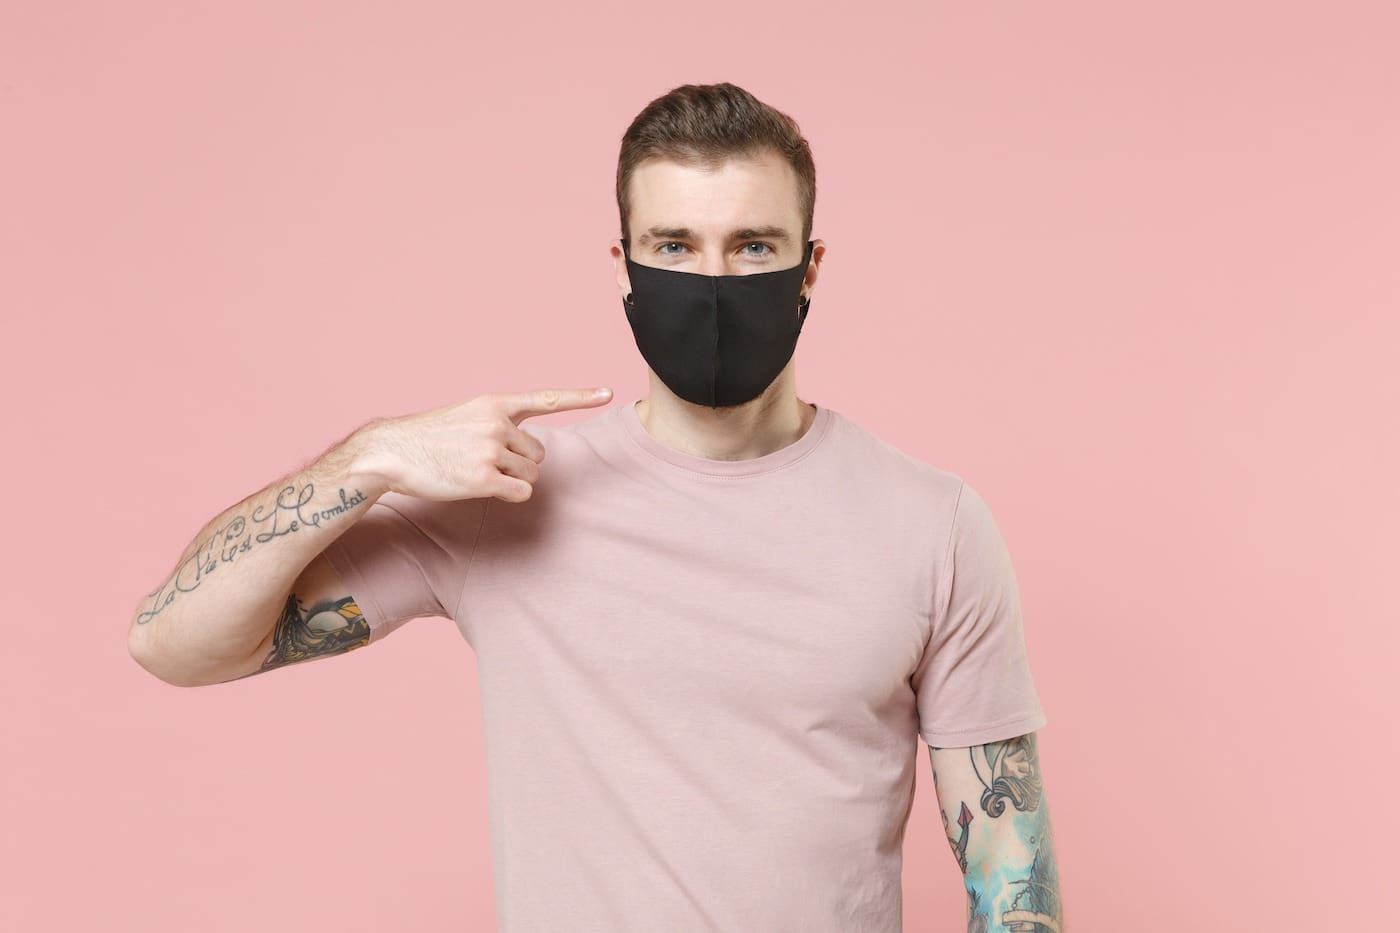 Video: How effective are face masks?